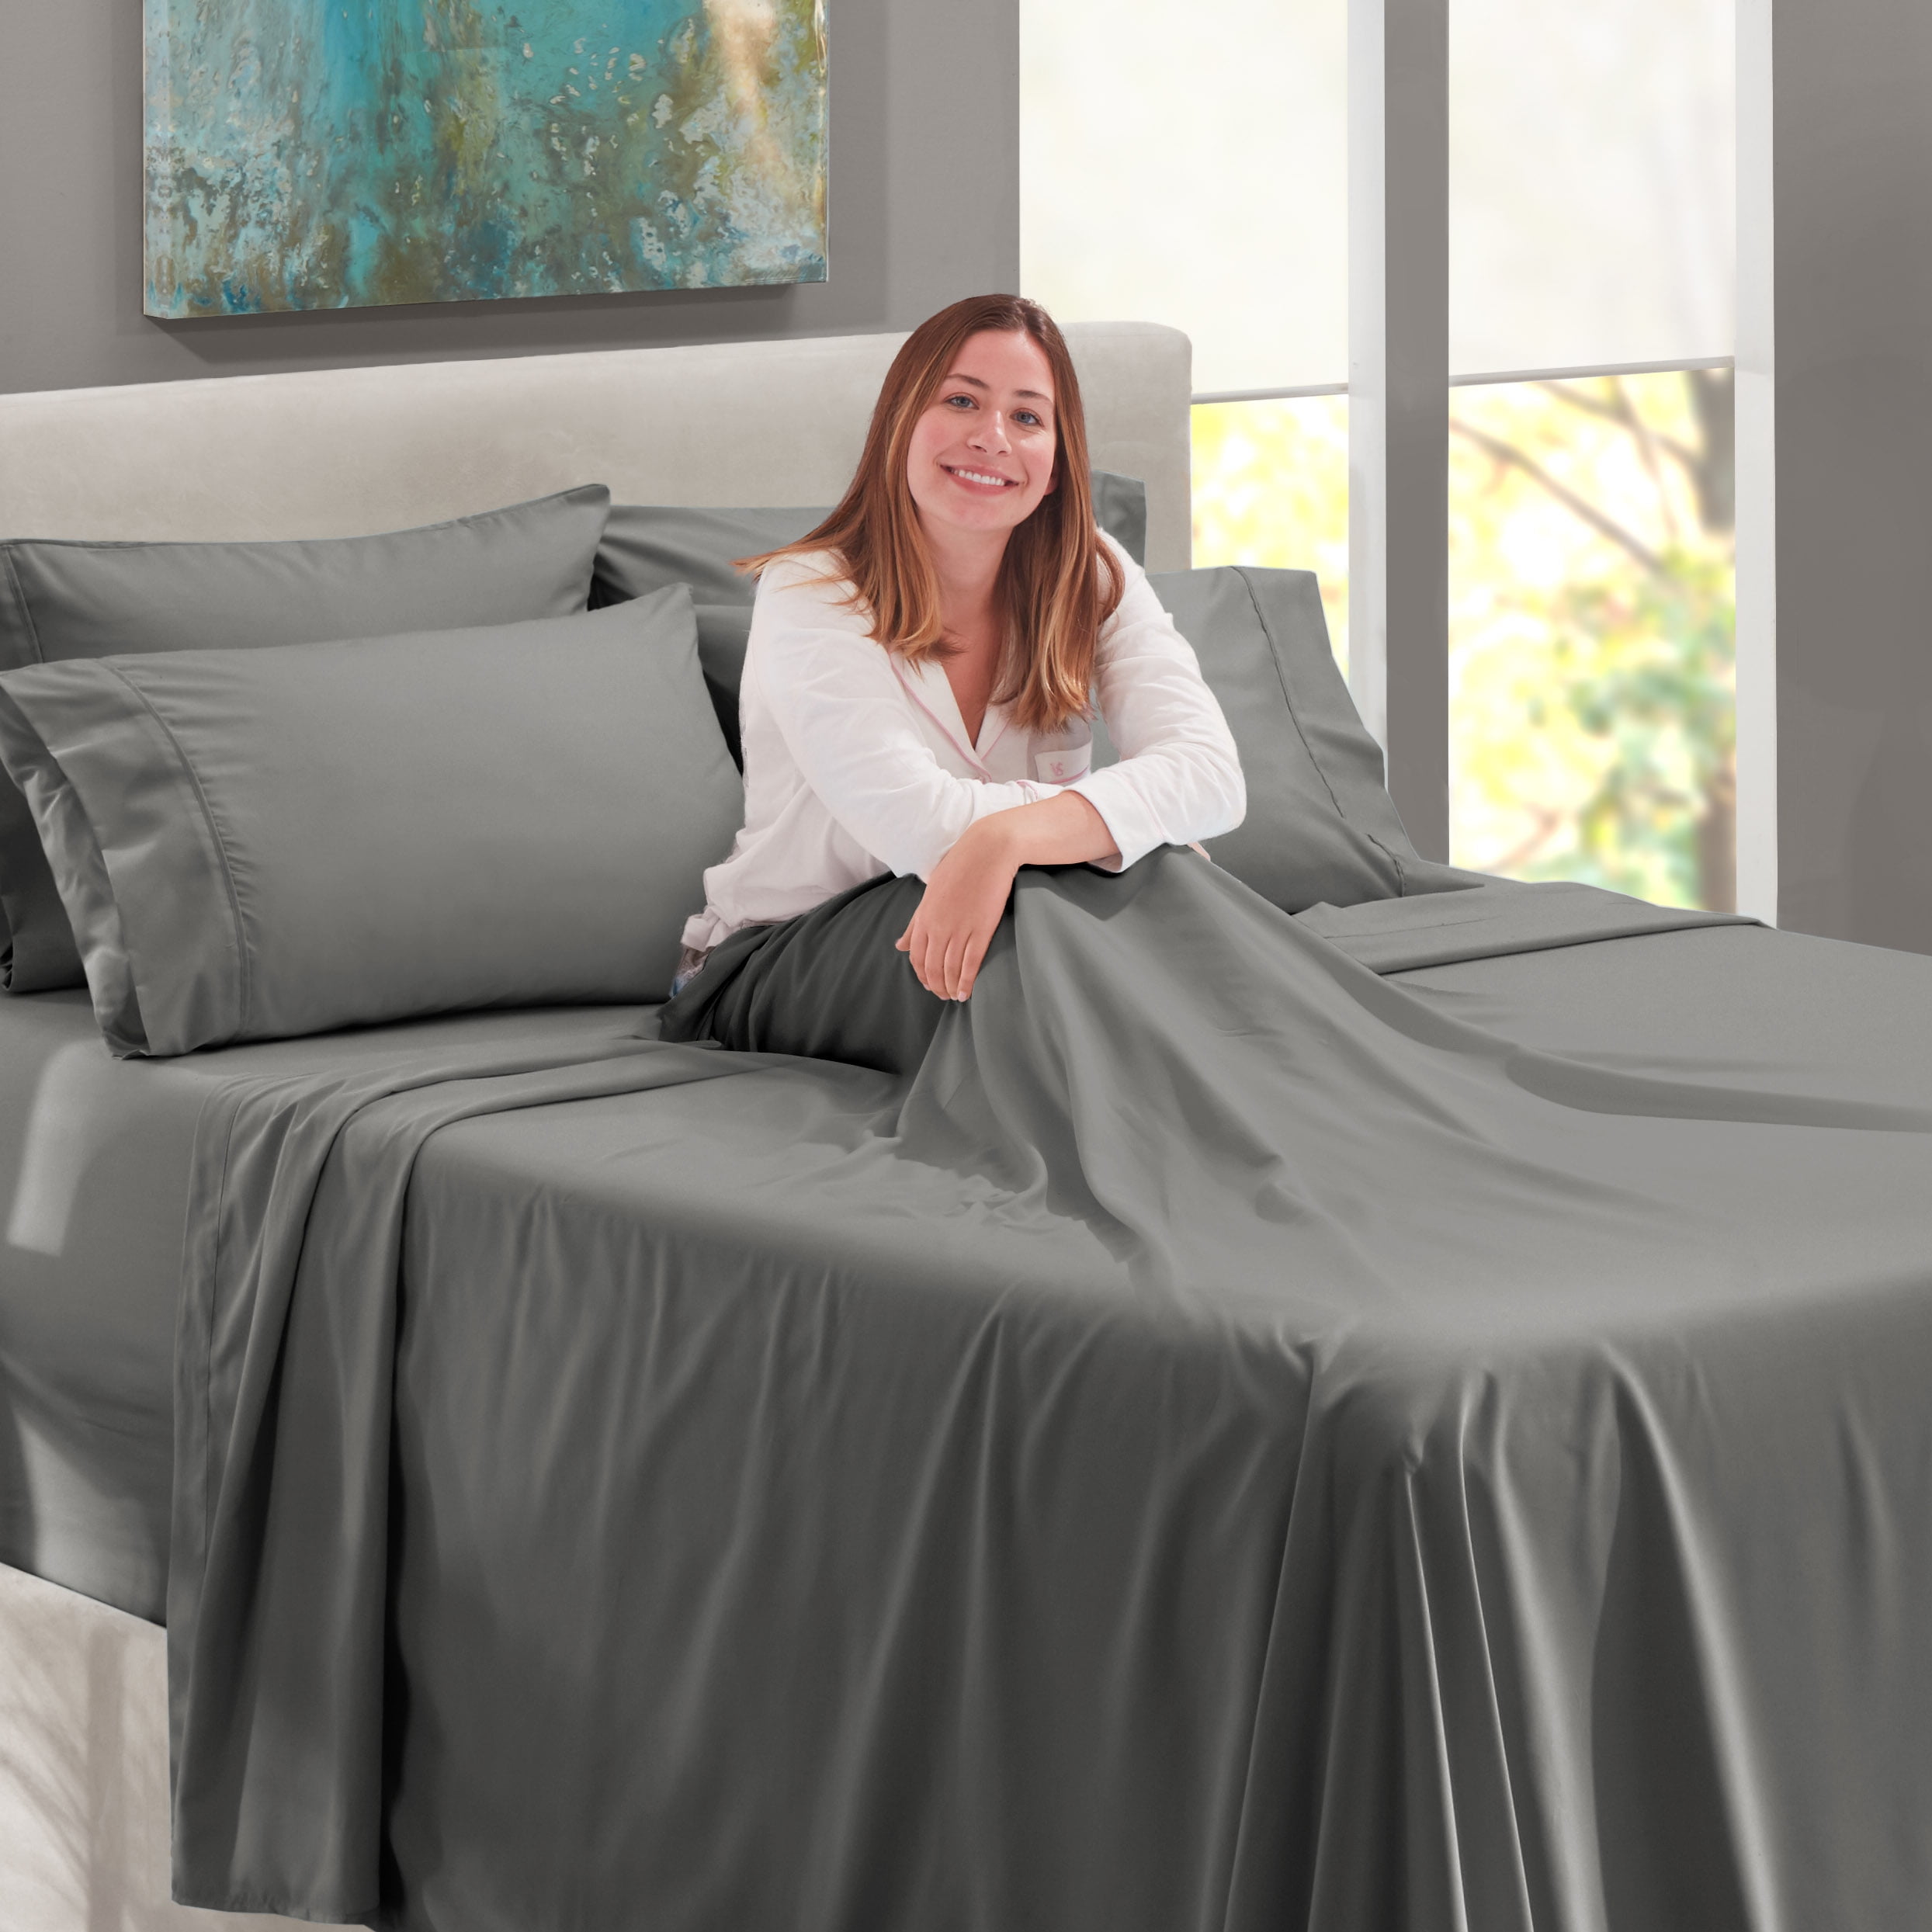 Non Slip Bed Sheets,King Size Fitted Sheet,Deep Pocket Fitted  Sheet,Non-Slip,for 18â€-24â€ in Mattress,It's Perfect for Skincare and  Won't Slip Off.